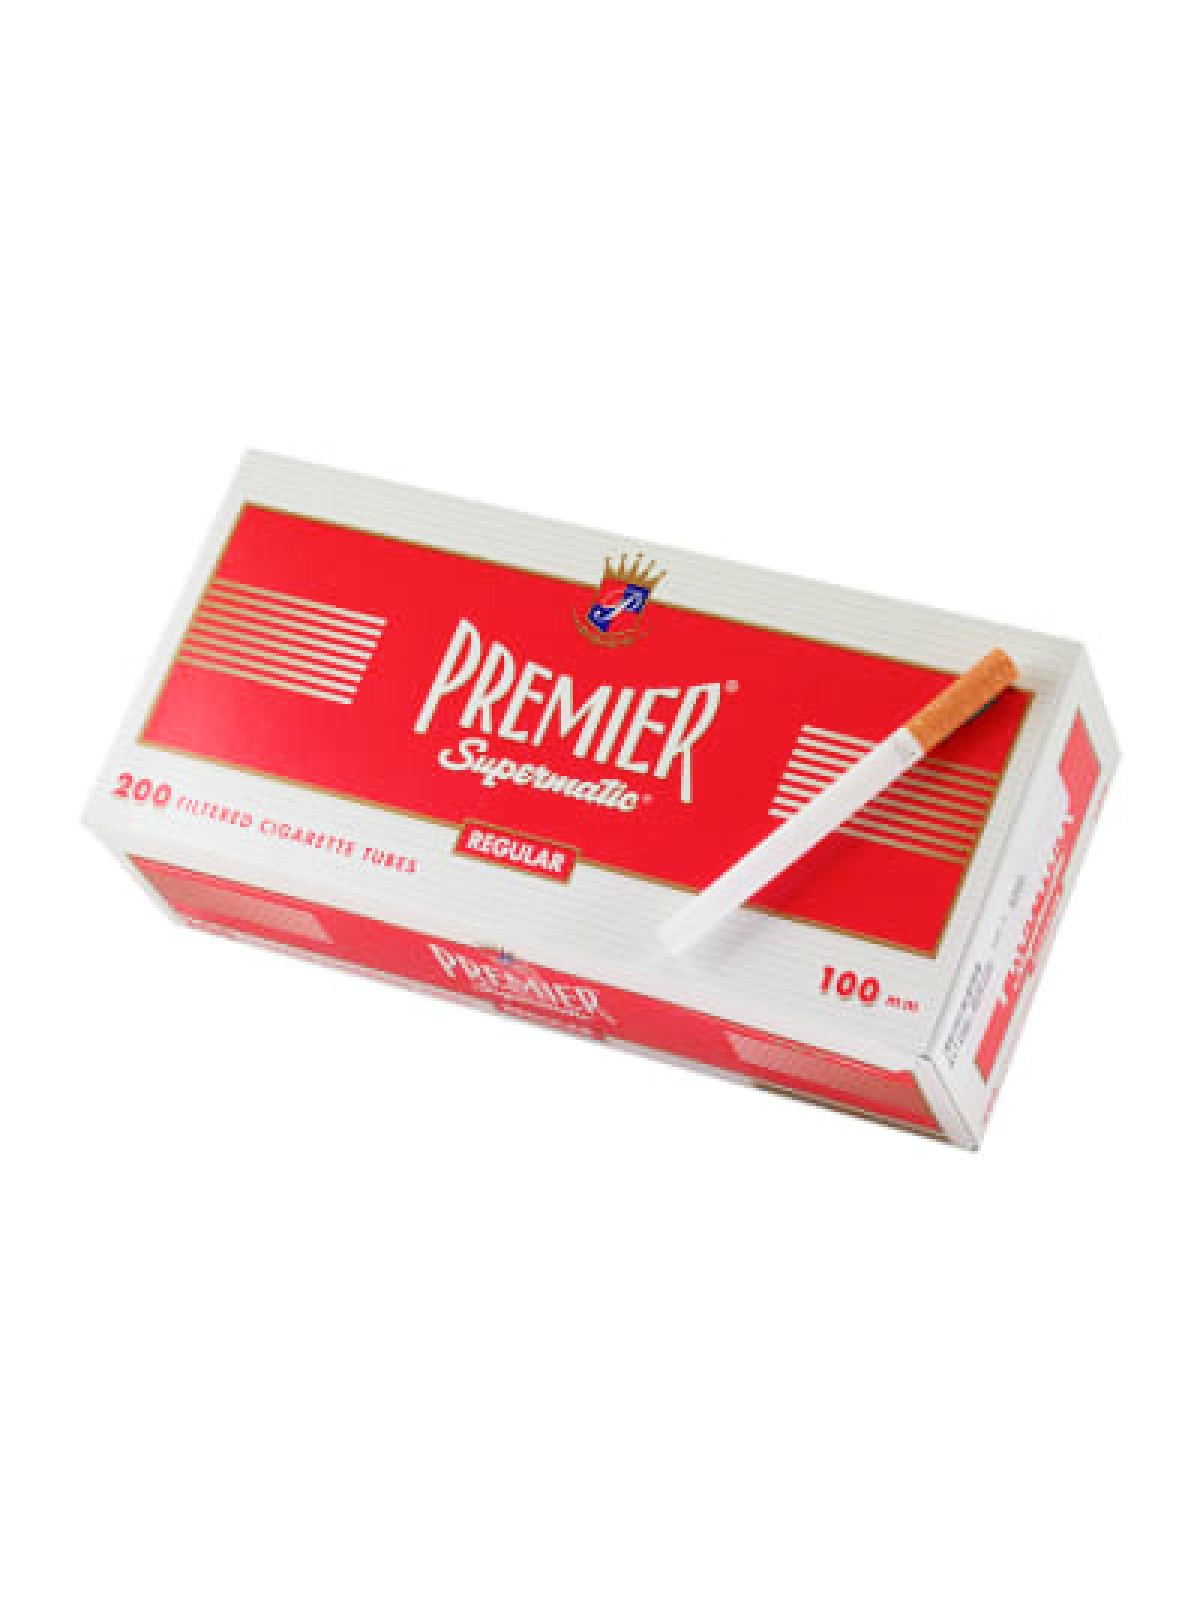 PREMIER SUPERMATIC RED 100